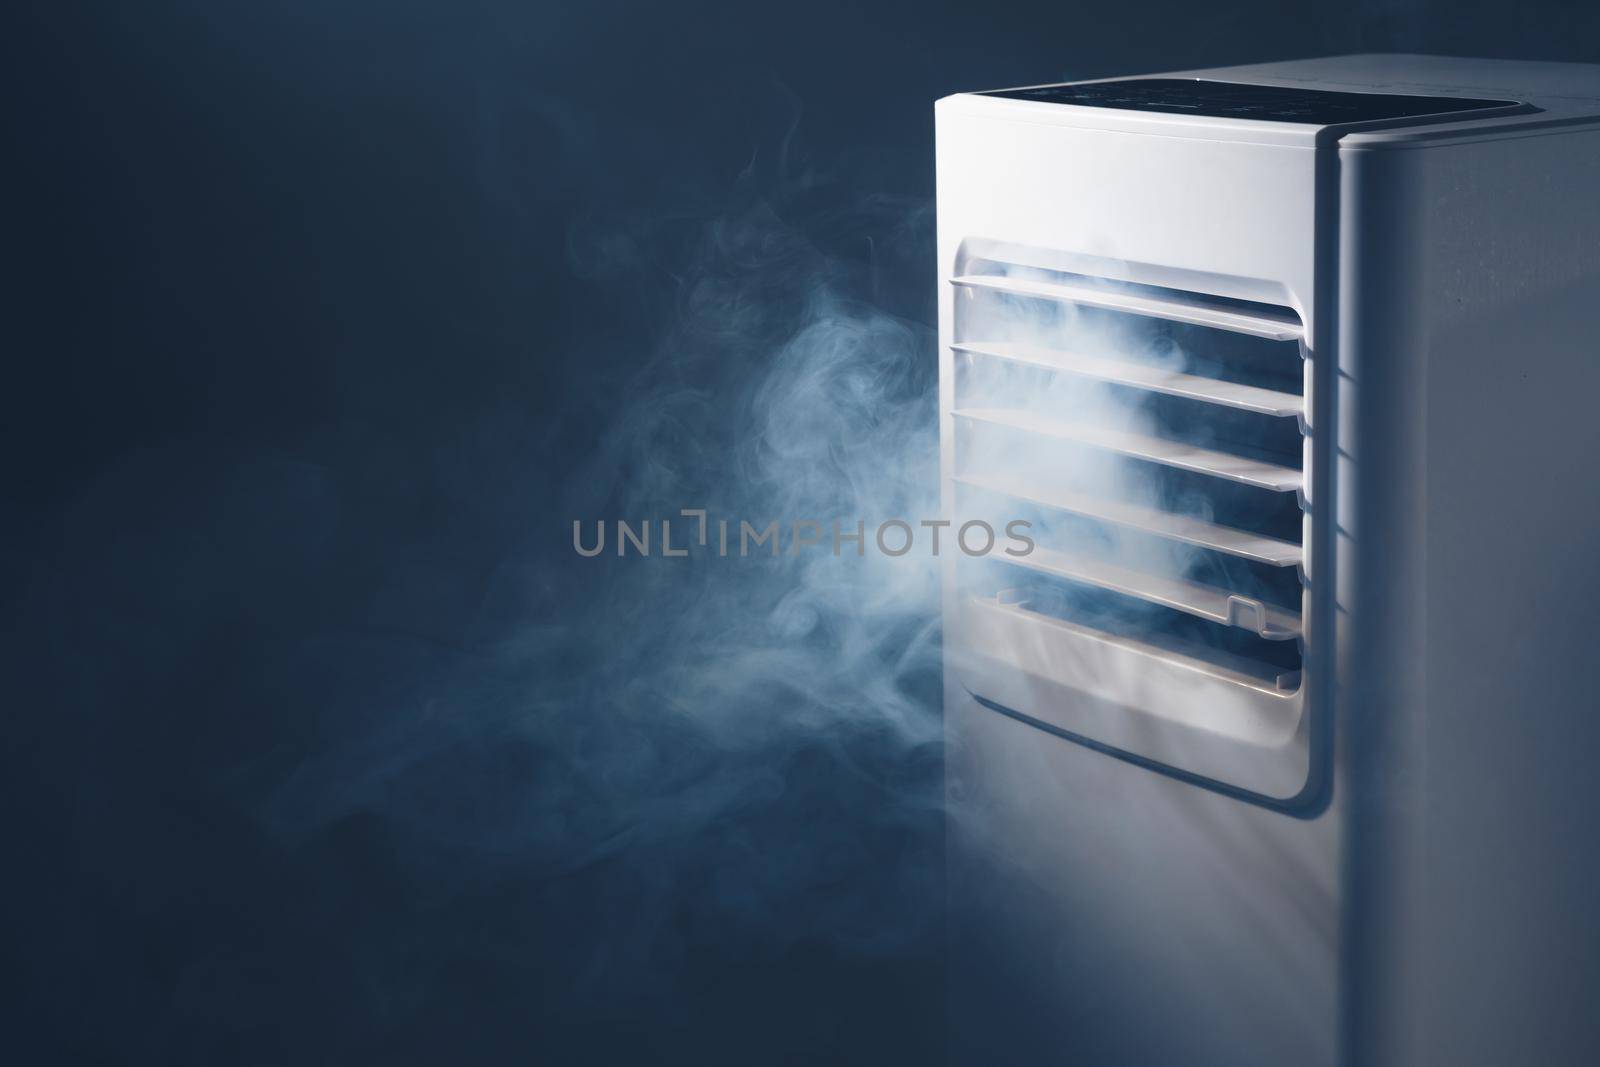 air conditioner louvers outlet with cold steam, close-up view